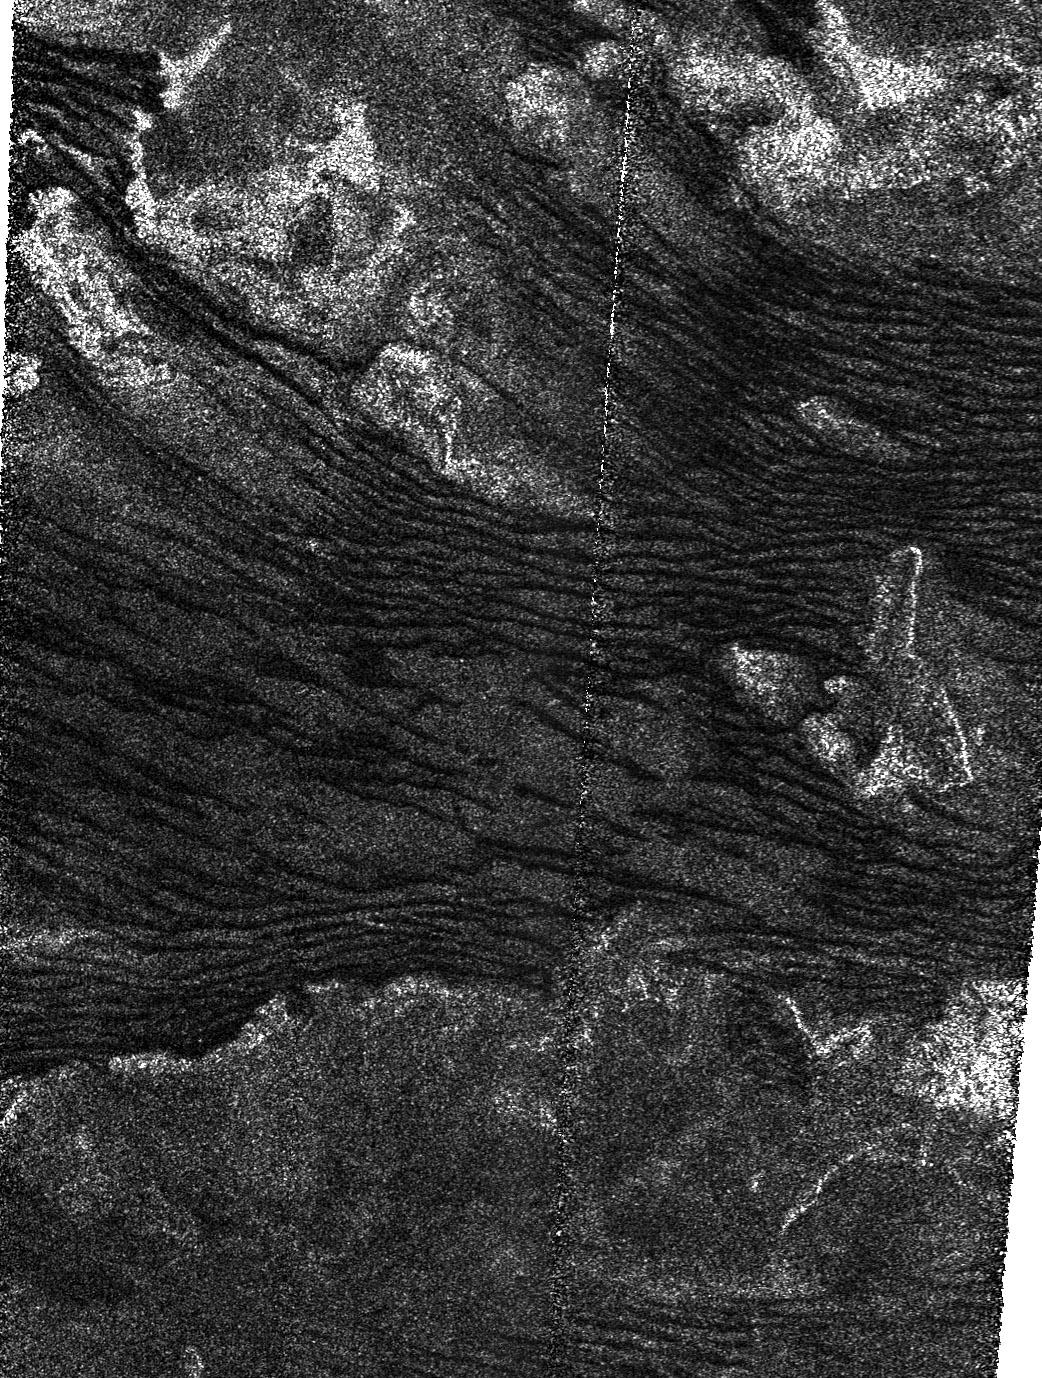 This is a portion of a Cassini radar mapper image obtained by the Cassini spacecraft on its Dec. 21, 2008, flyby of Saturn's moon Titan. 